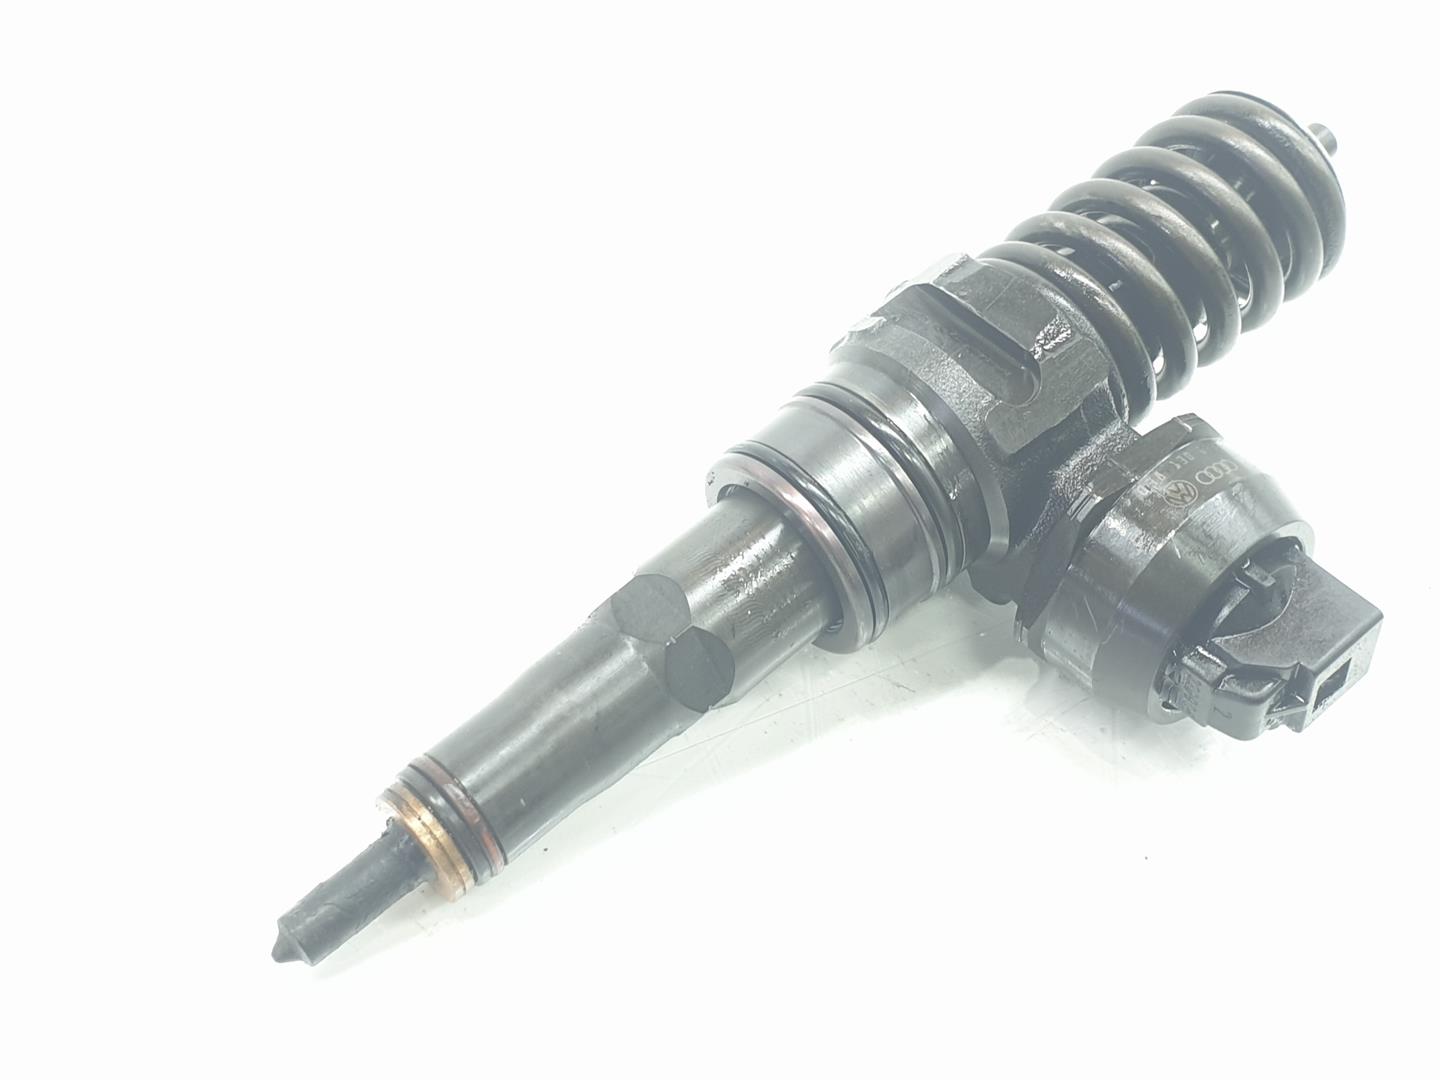 SEAT Ibiza 3 generation (2002-2008) Fuel Injector 038130073AG, 038130073AG, 1141CB 25099830